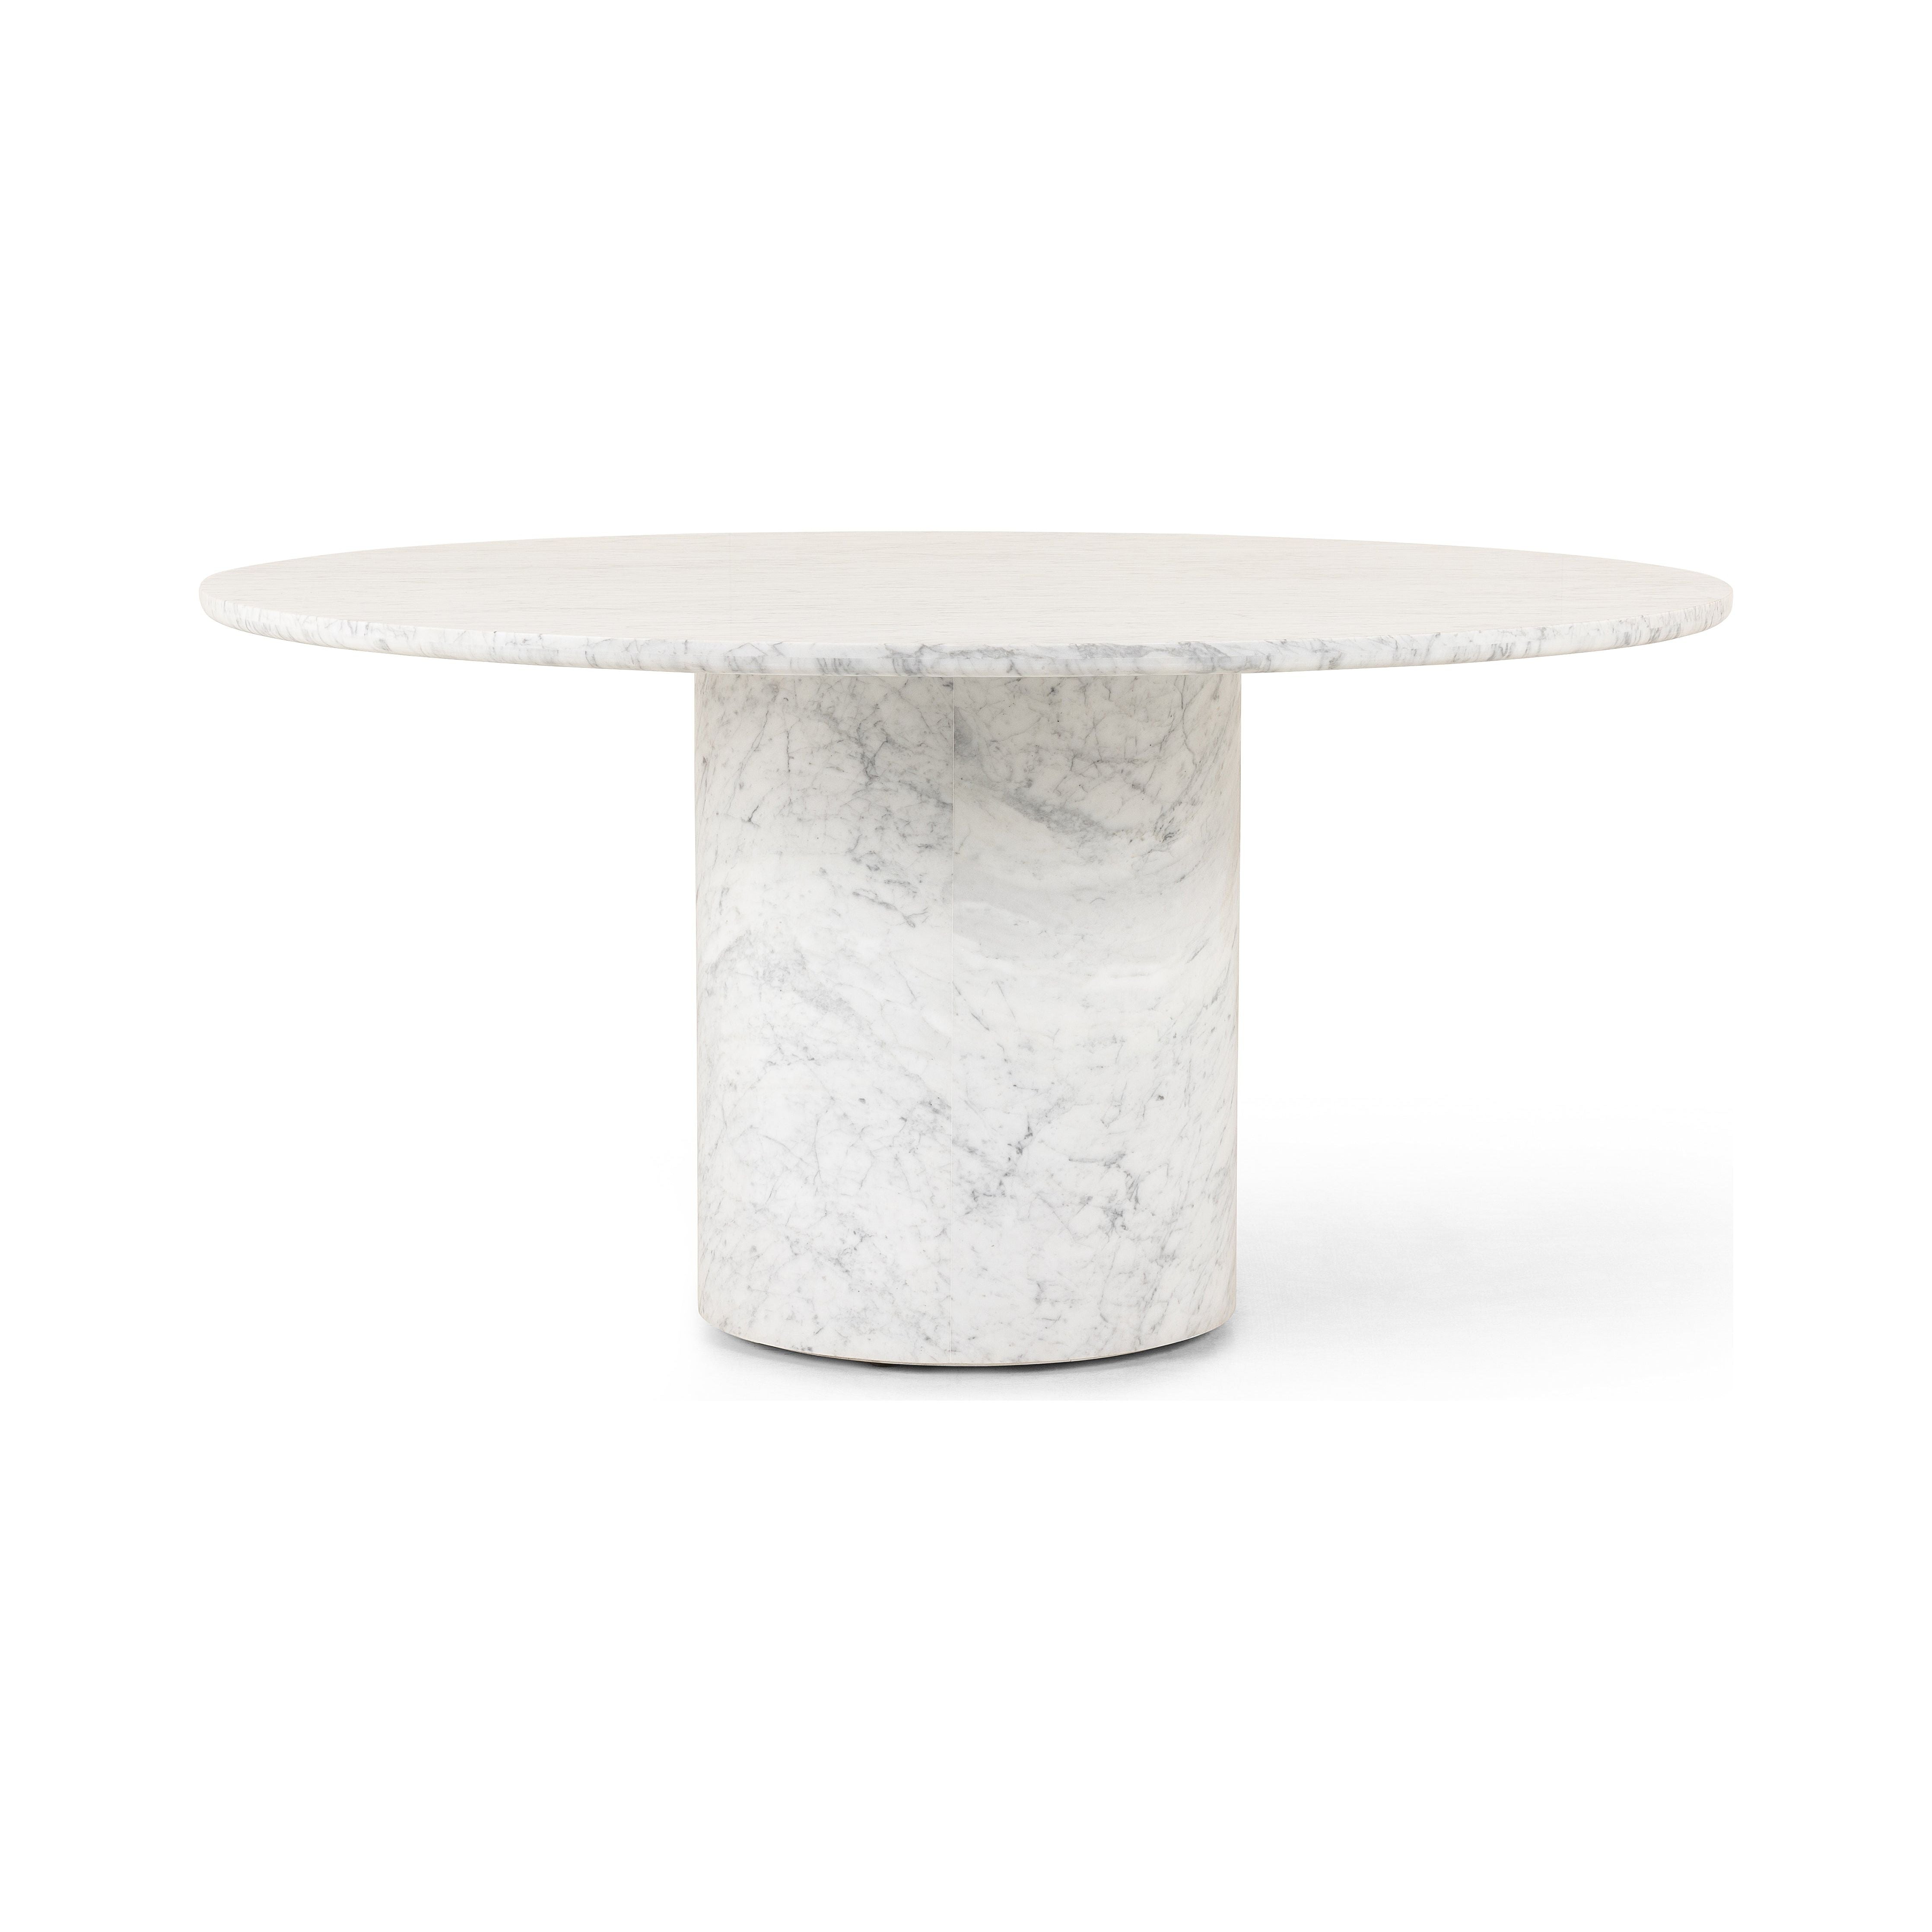 A statement in marble, this dining table showcases a simple cylinder base with a round table top. Style in a dining room or entryway. Seats six comfortably. Amethyst Home provides interior design, new construction, custom furniture, and area rugs in the Scottsdale metro area.